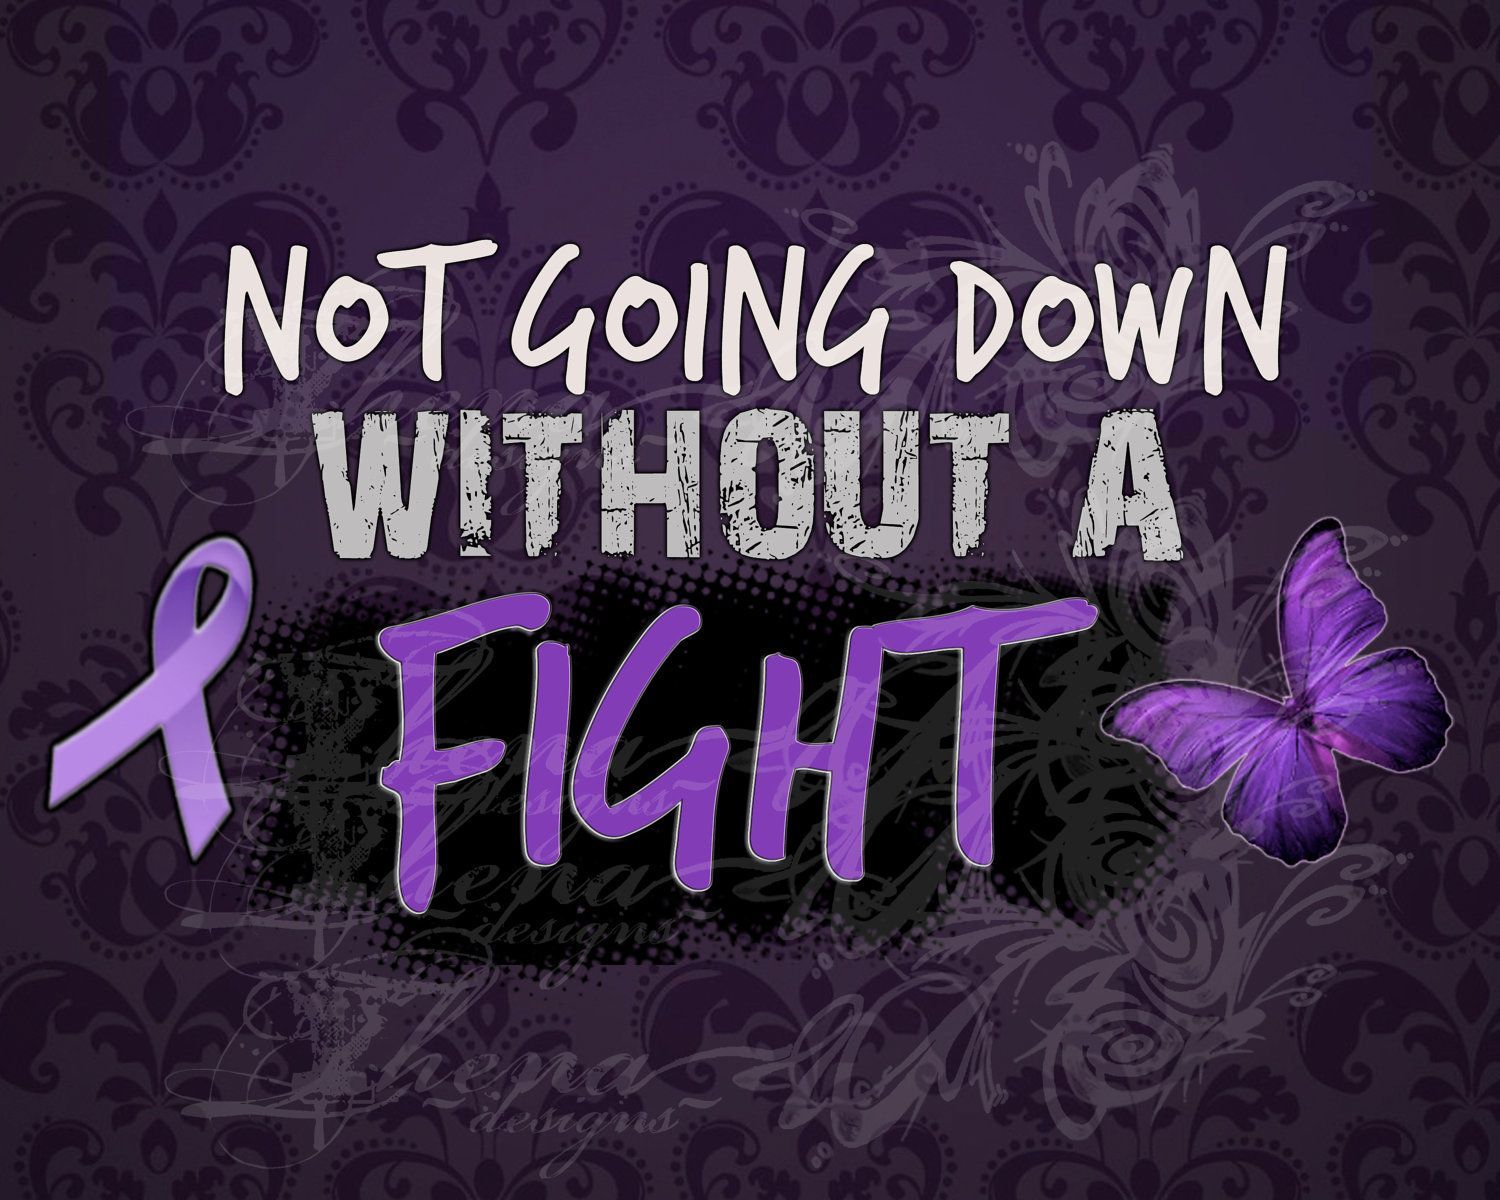 Printable: “Not Going Down Without A Fight” via Etsy #Lupus